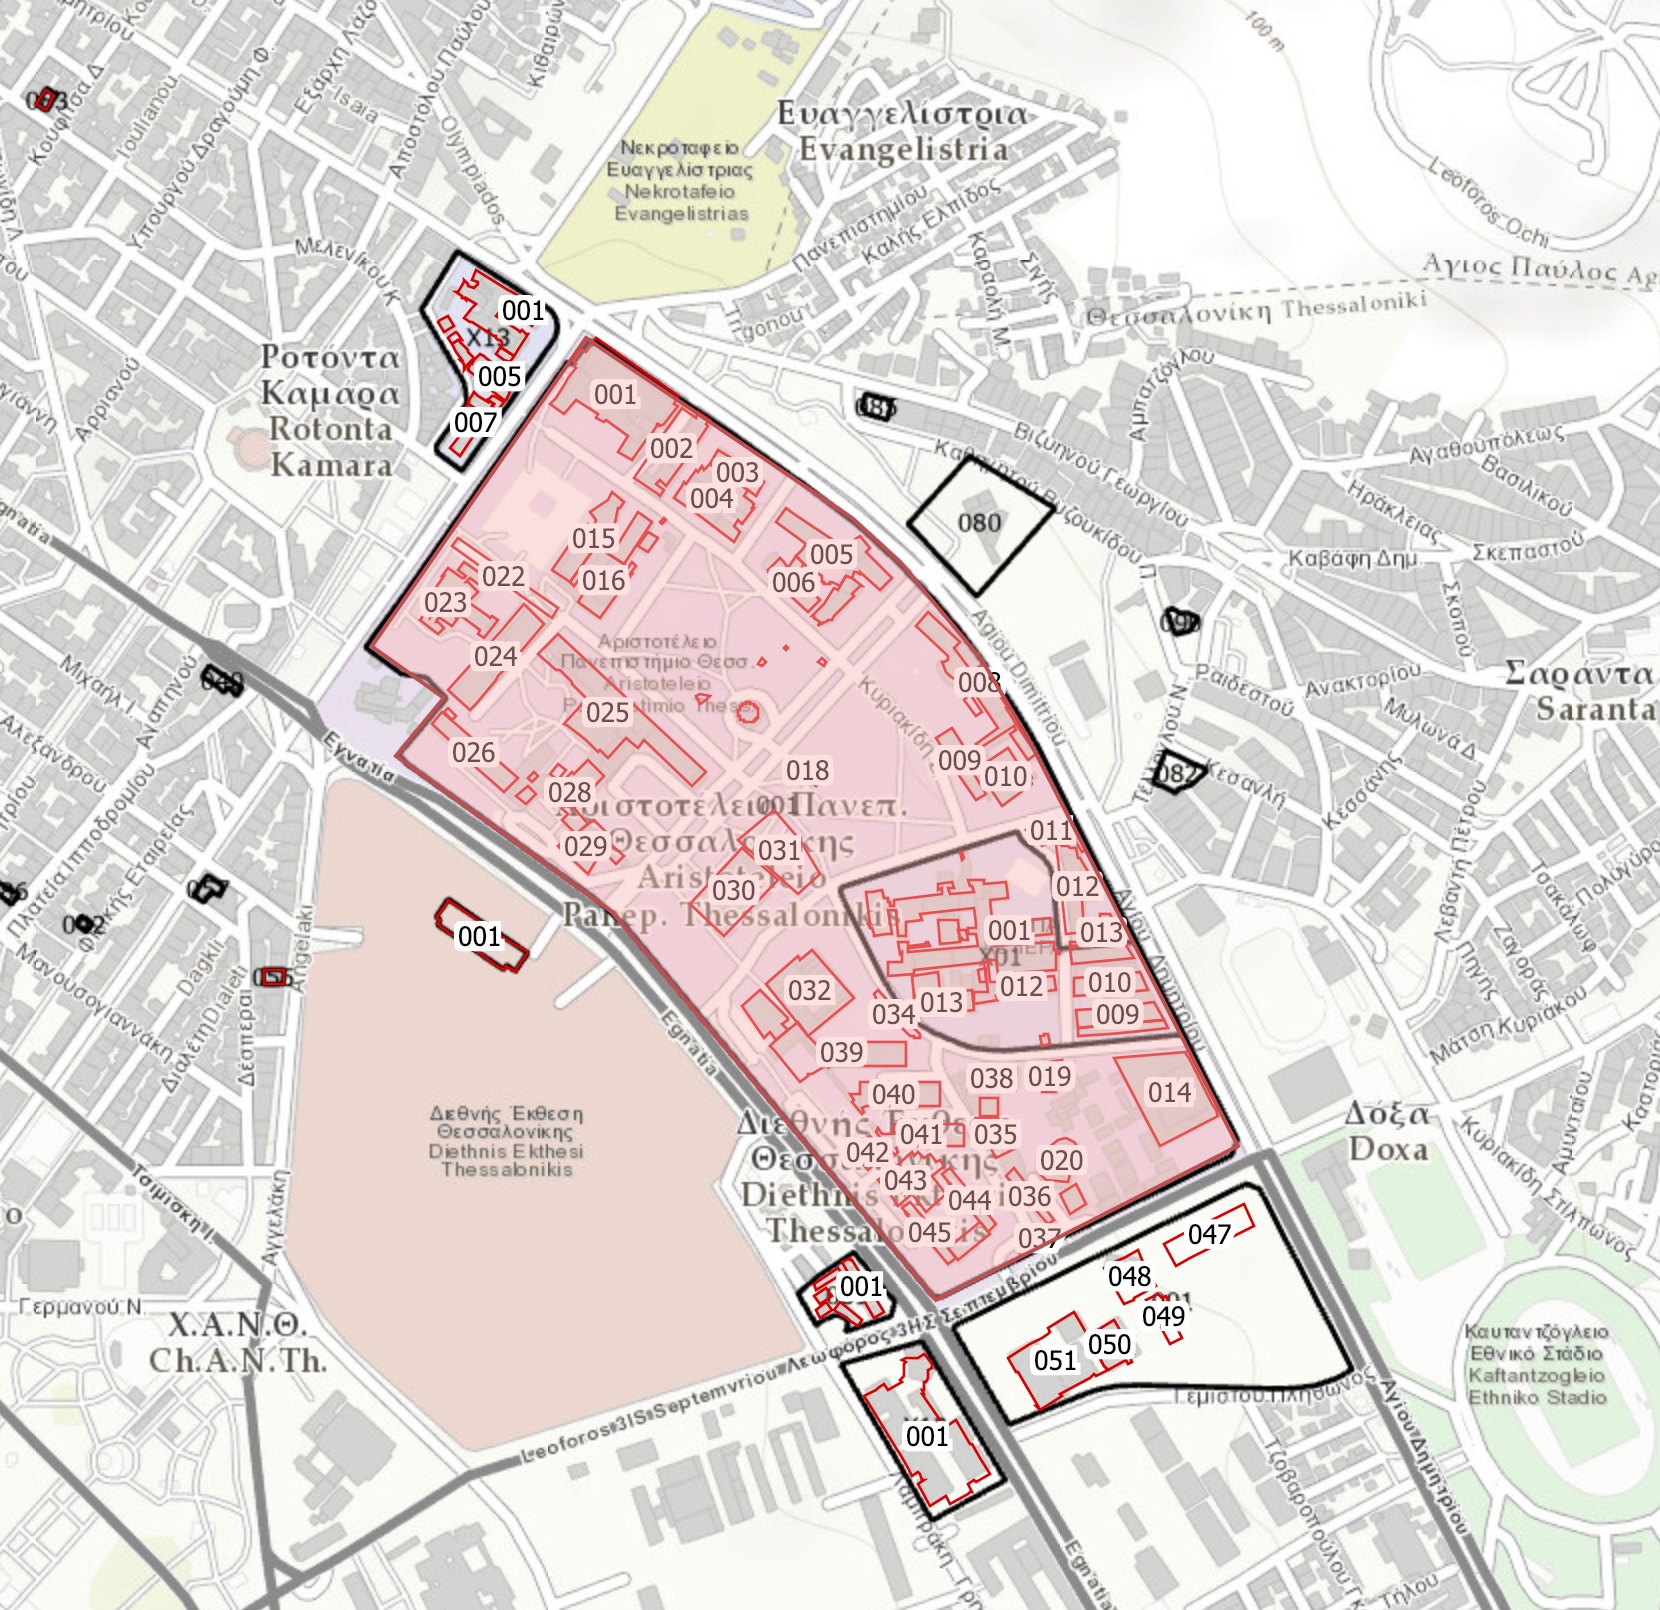 Product Campus safety Geofencing